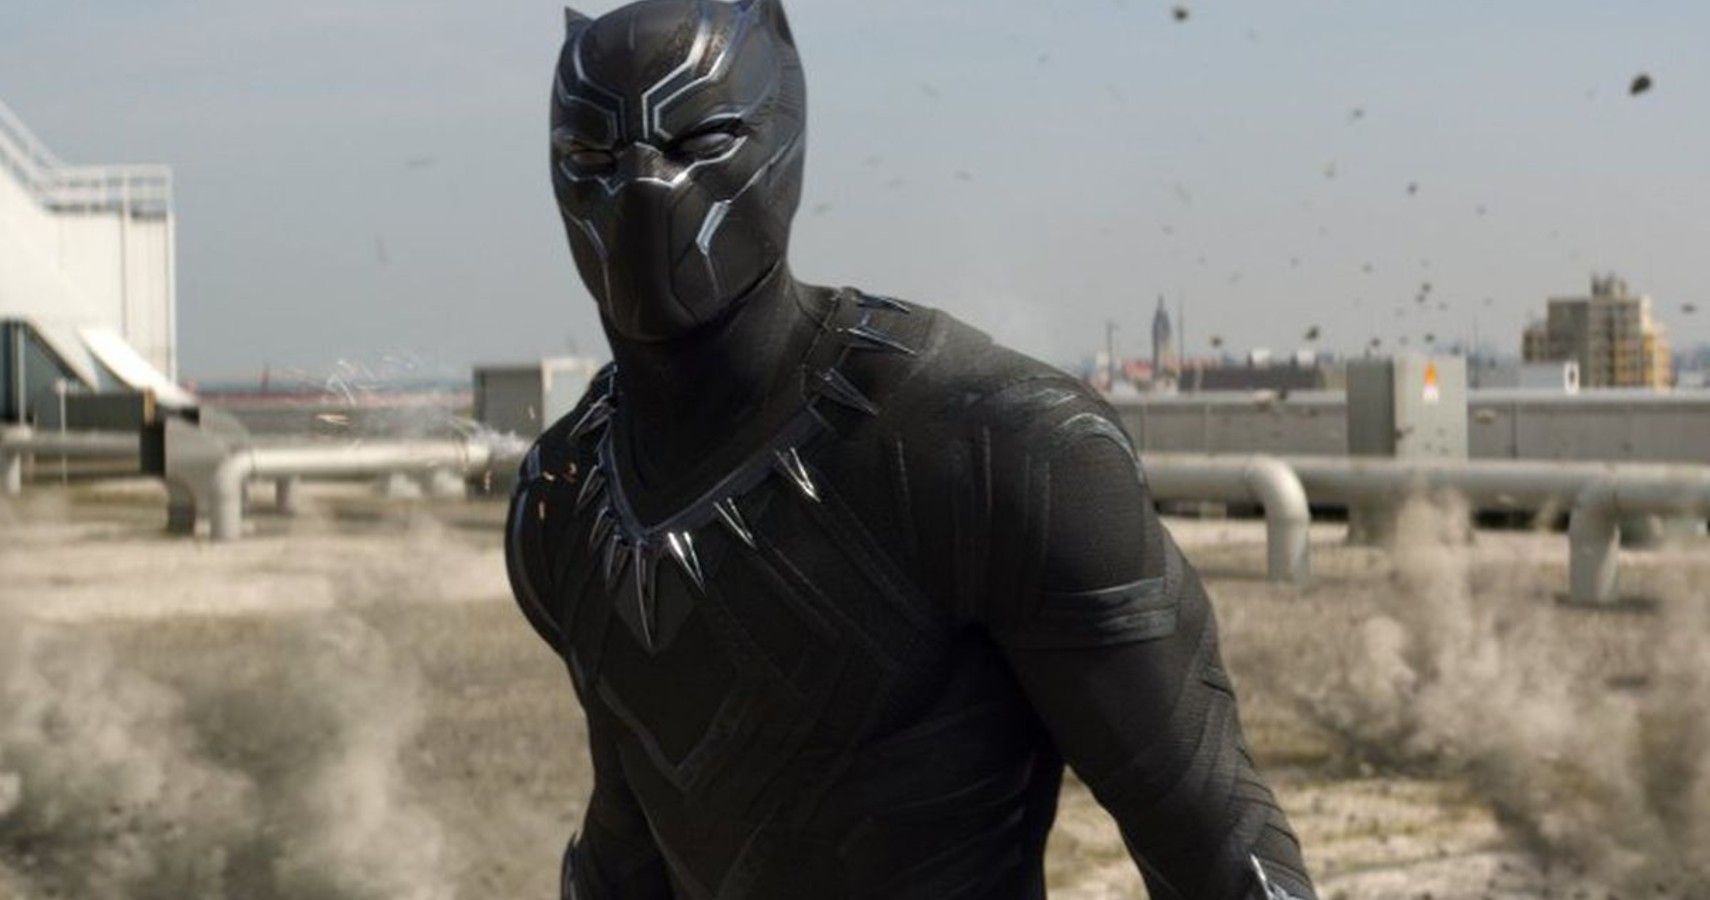 golpear postre cocina 10 Things You Didn't Know About Black Panther's Civil War Costume